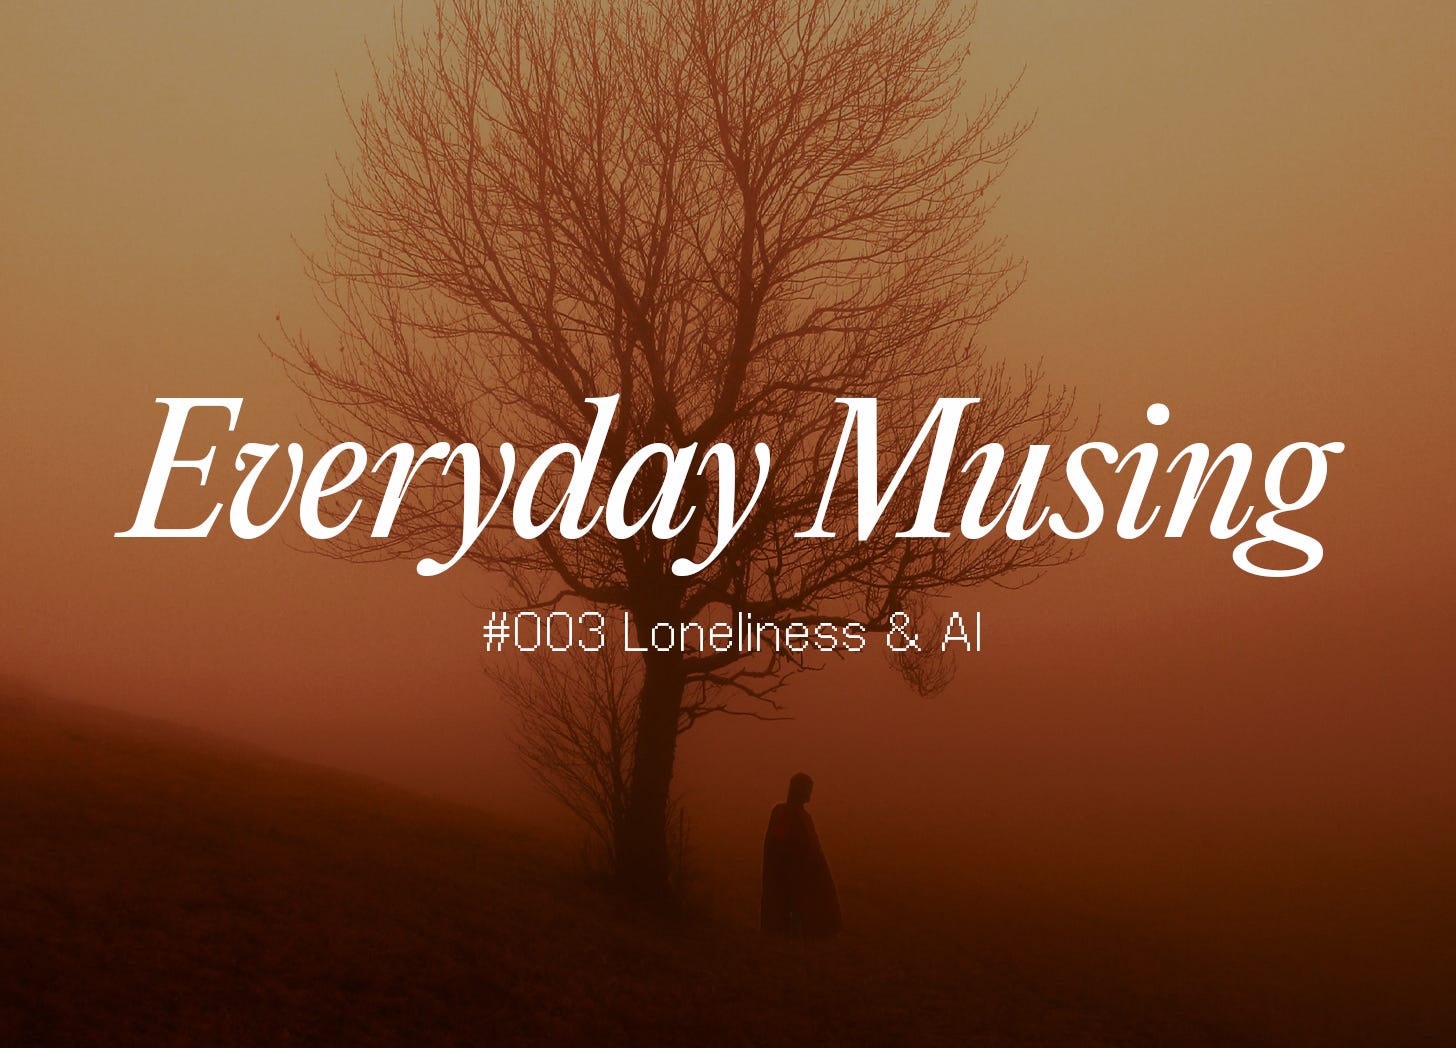 Everyday Musing: #003 Loneliness & AI